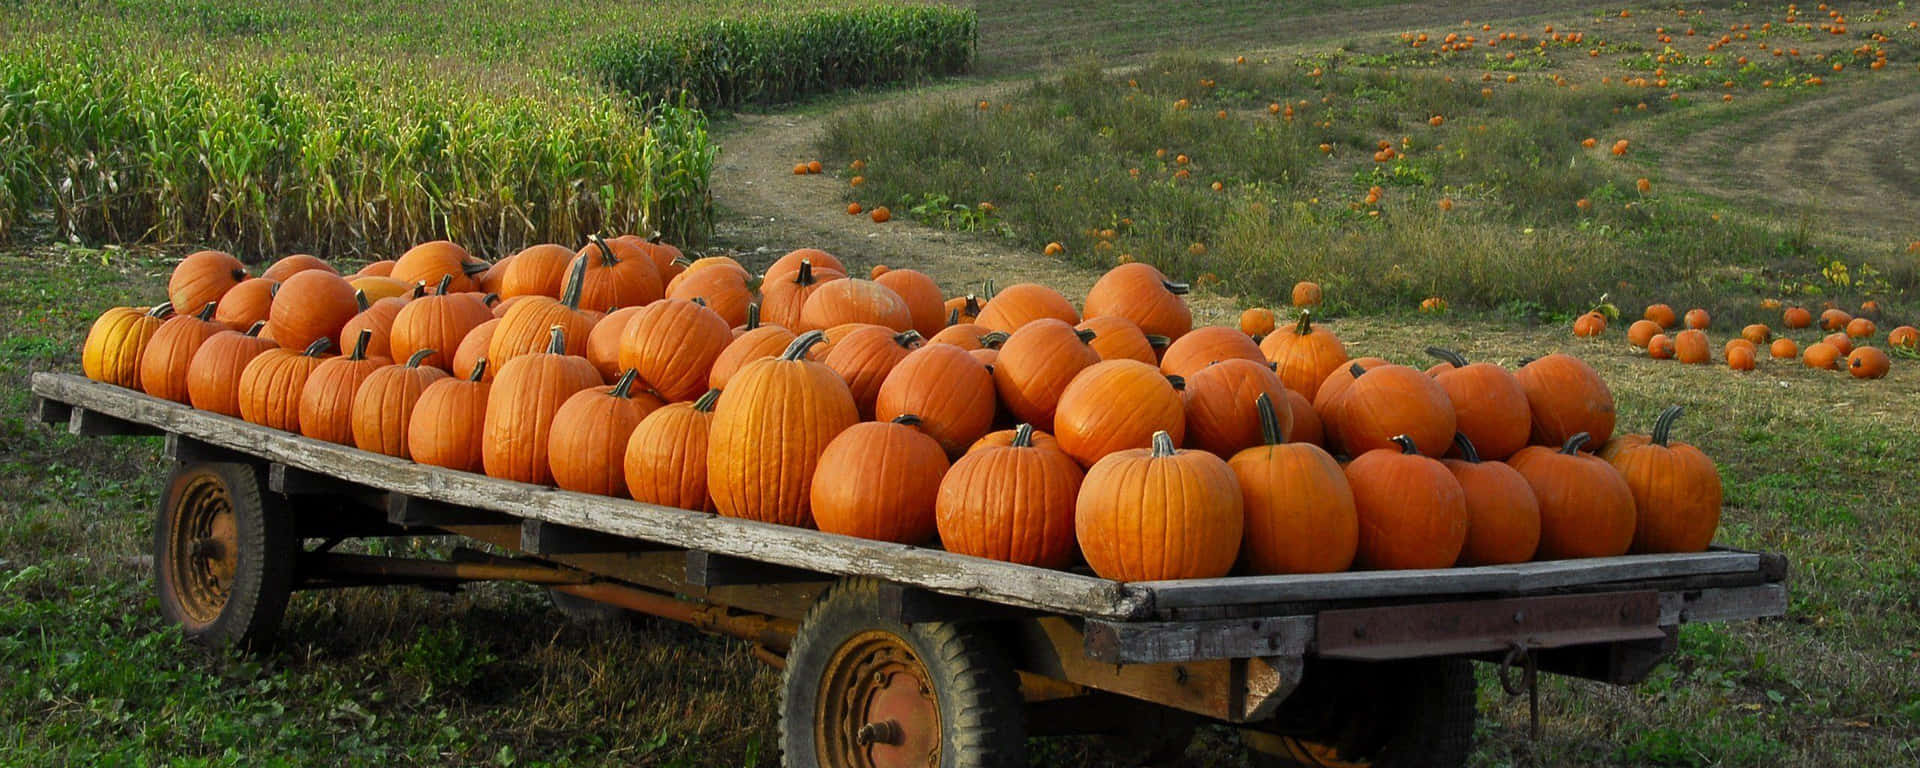 Bright pumpkins freshly picked from the pumpkin patch make for the perfect Autumn décor. Wallpaper